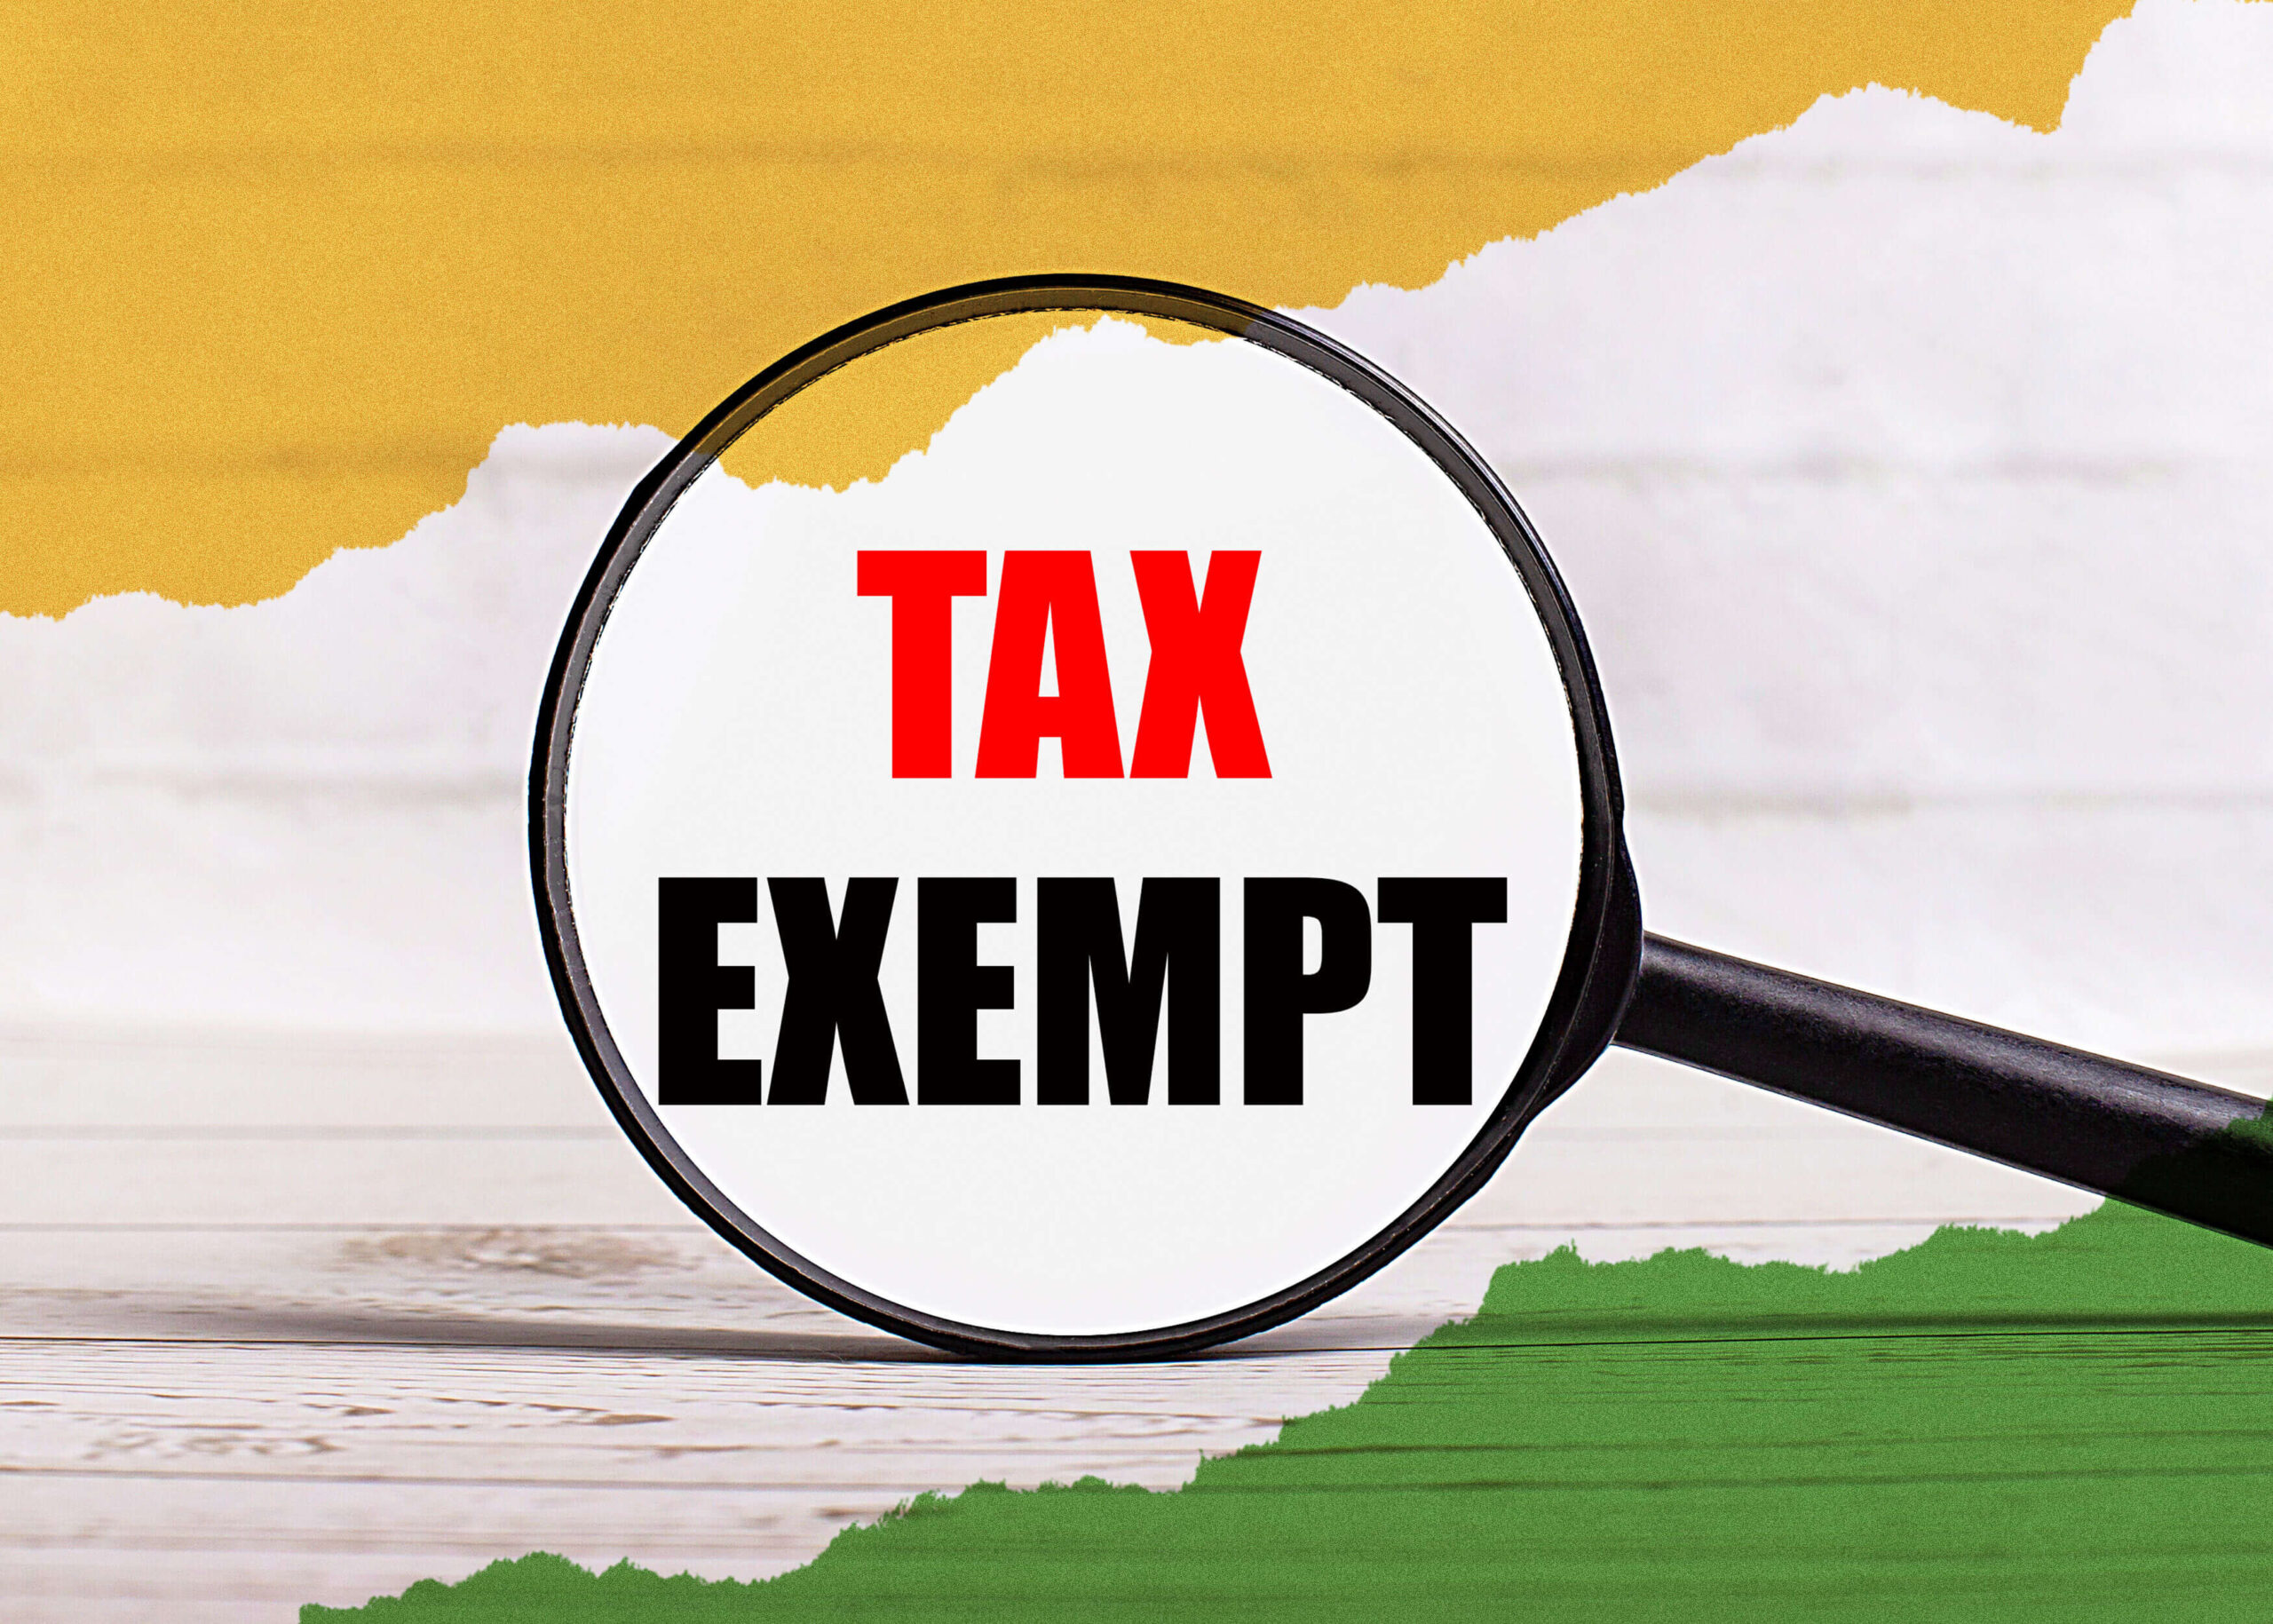 What are the regulations for tax exemptions?